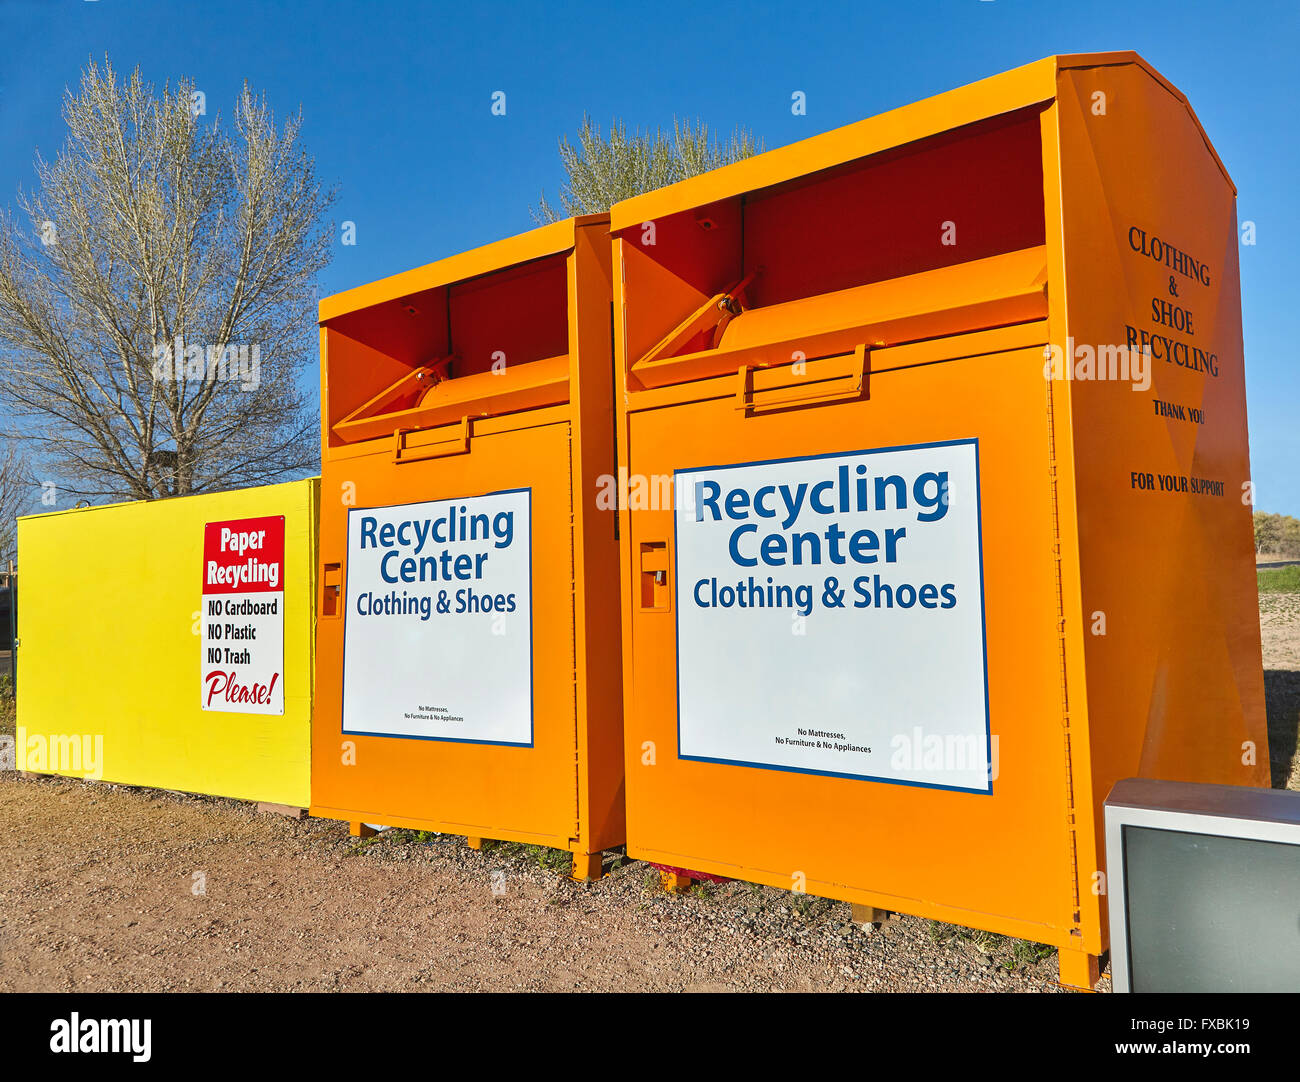 Recycling center collection bins for paper clothing disposal waste management Stock Photo